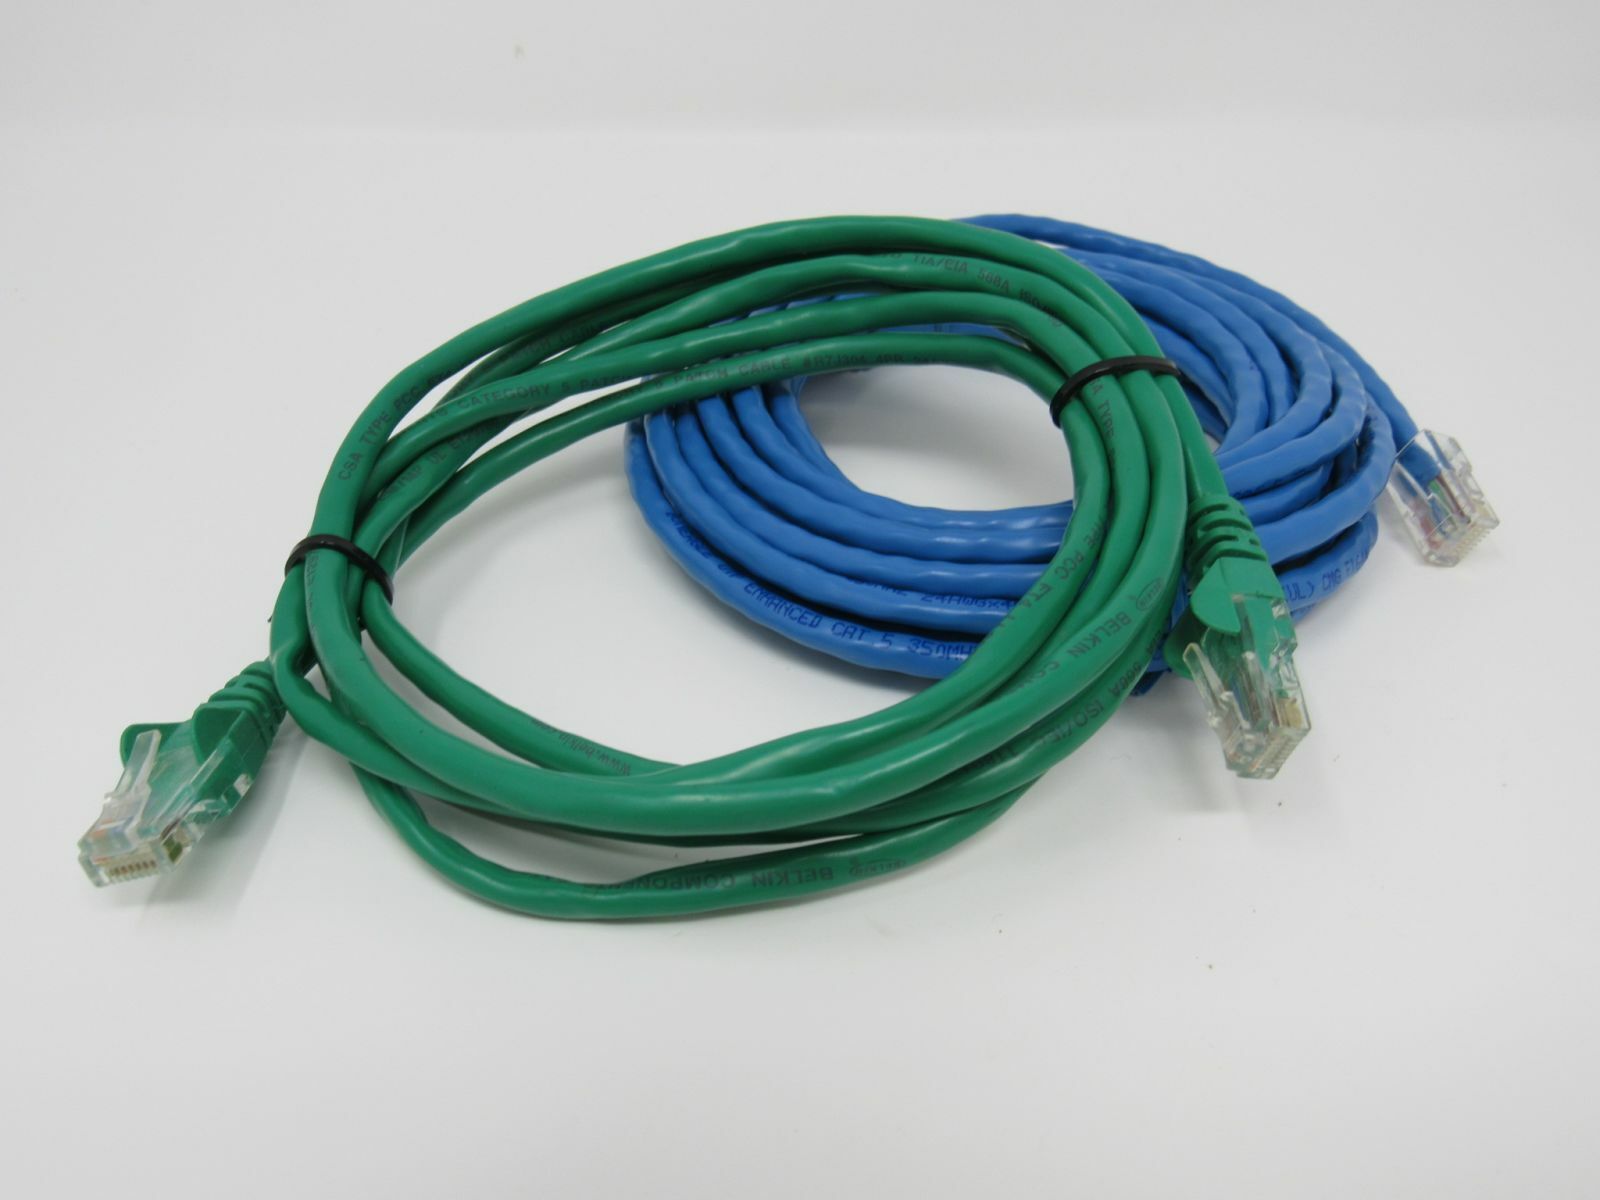 Standard Lot of 2 Ethernet Patch Cables RJ-45 Variety of Lengths Cat5e